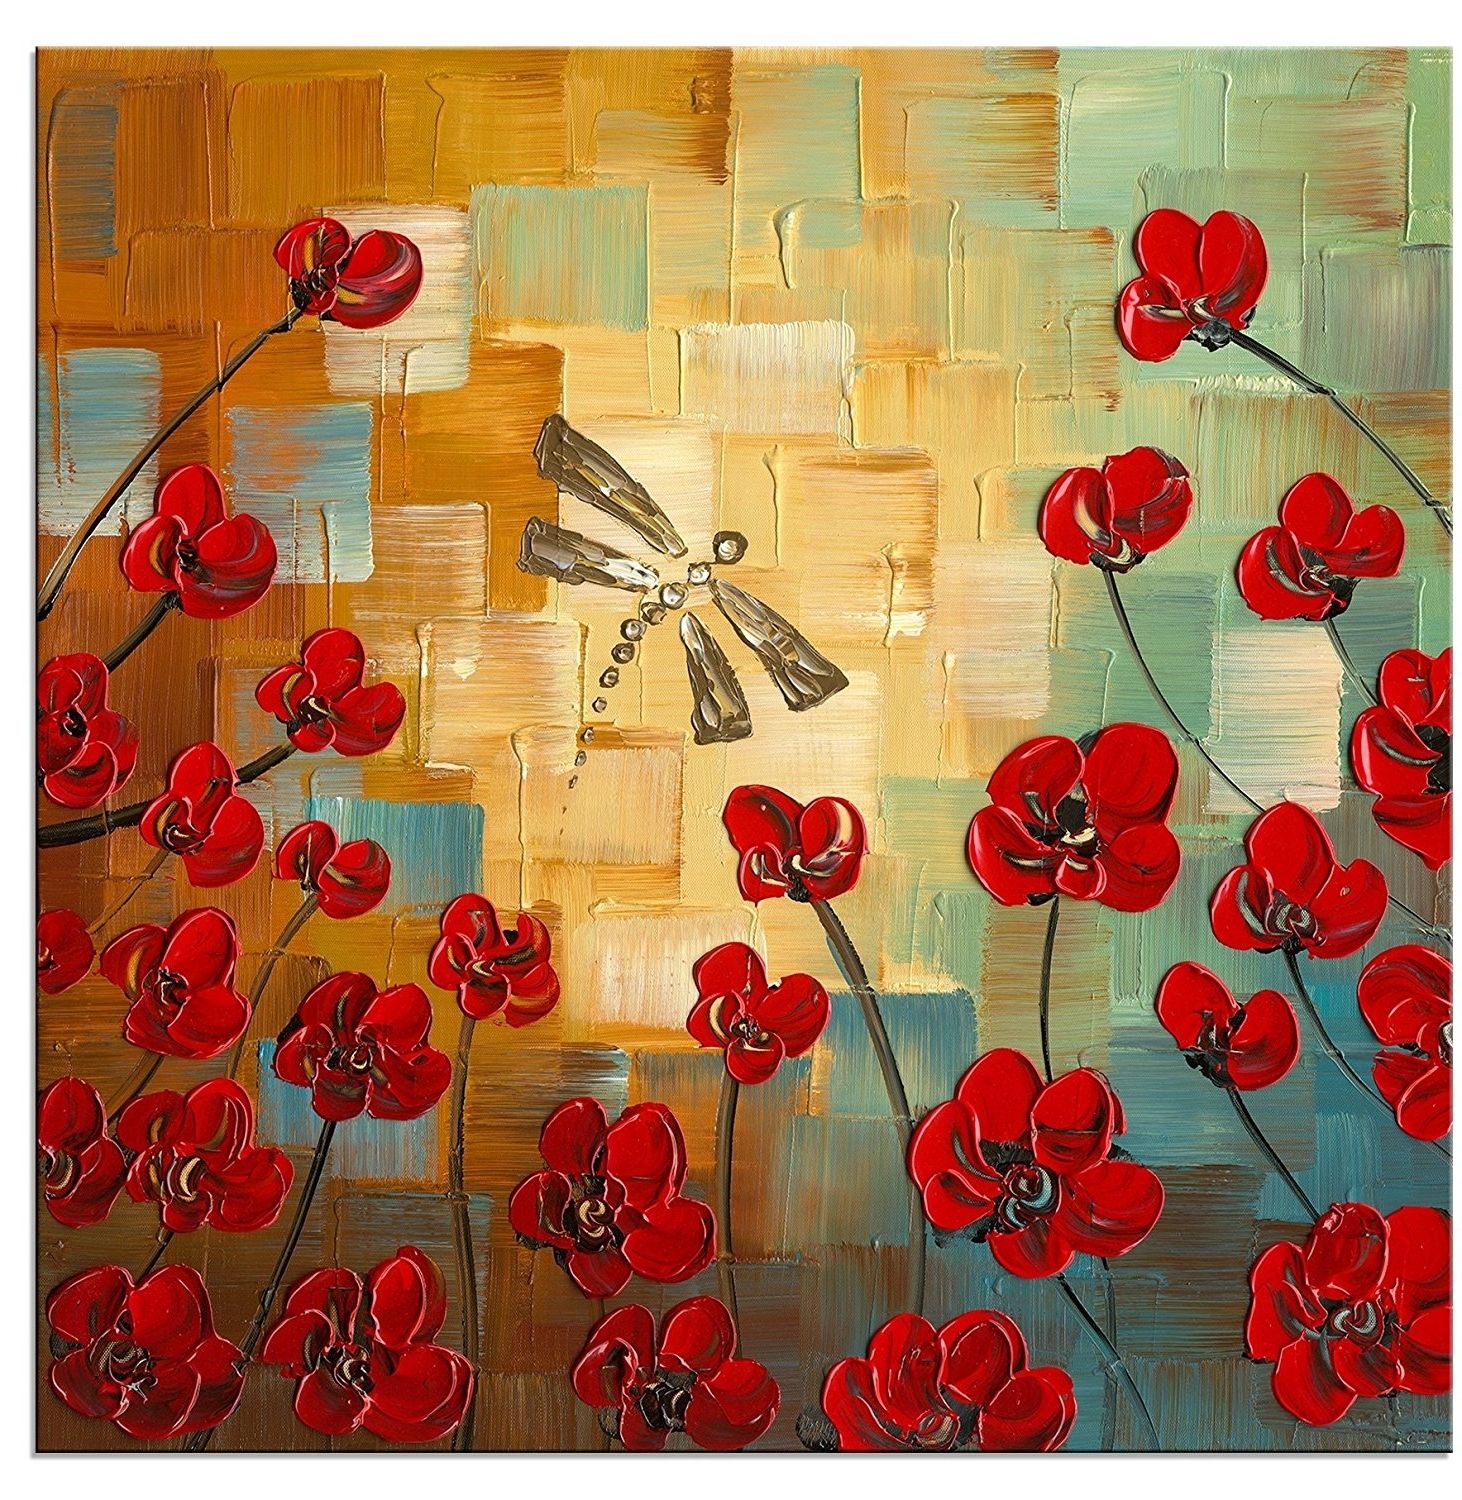 [%dragonfly Modern Flowers Artwork 100% Hand Painted Stretched And Intended For 2017 Floral Canvas Wall Art|floral Canvas Wall Art With Trendy Dragonfly Modern Flowers Artwork 100% Hand Painted Stretched And|most Popular Floral Canvas Wall Art With Regard To Dragonfly Modern Flowers Artwork 100% Hand Painted Stretched And|well Known Dragonfly Modern Flowers Artwork 100% Hand Painted Stretched And With Floral Canvas Wall Art%] (View 6 of 15)